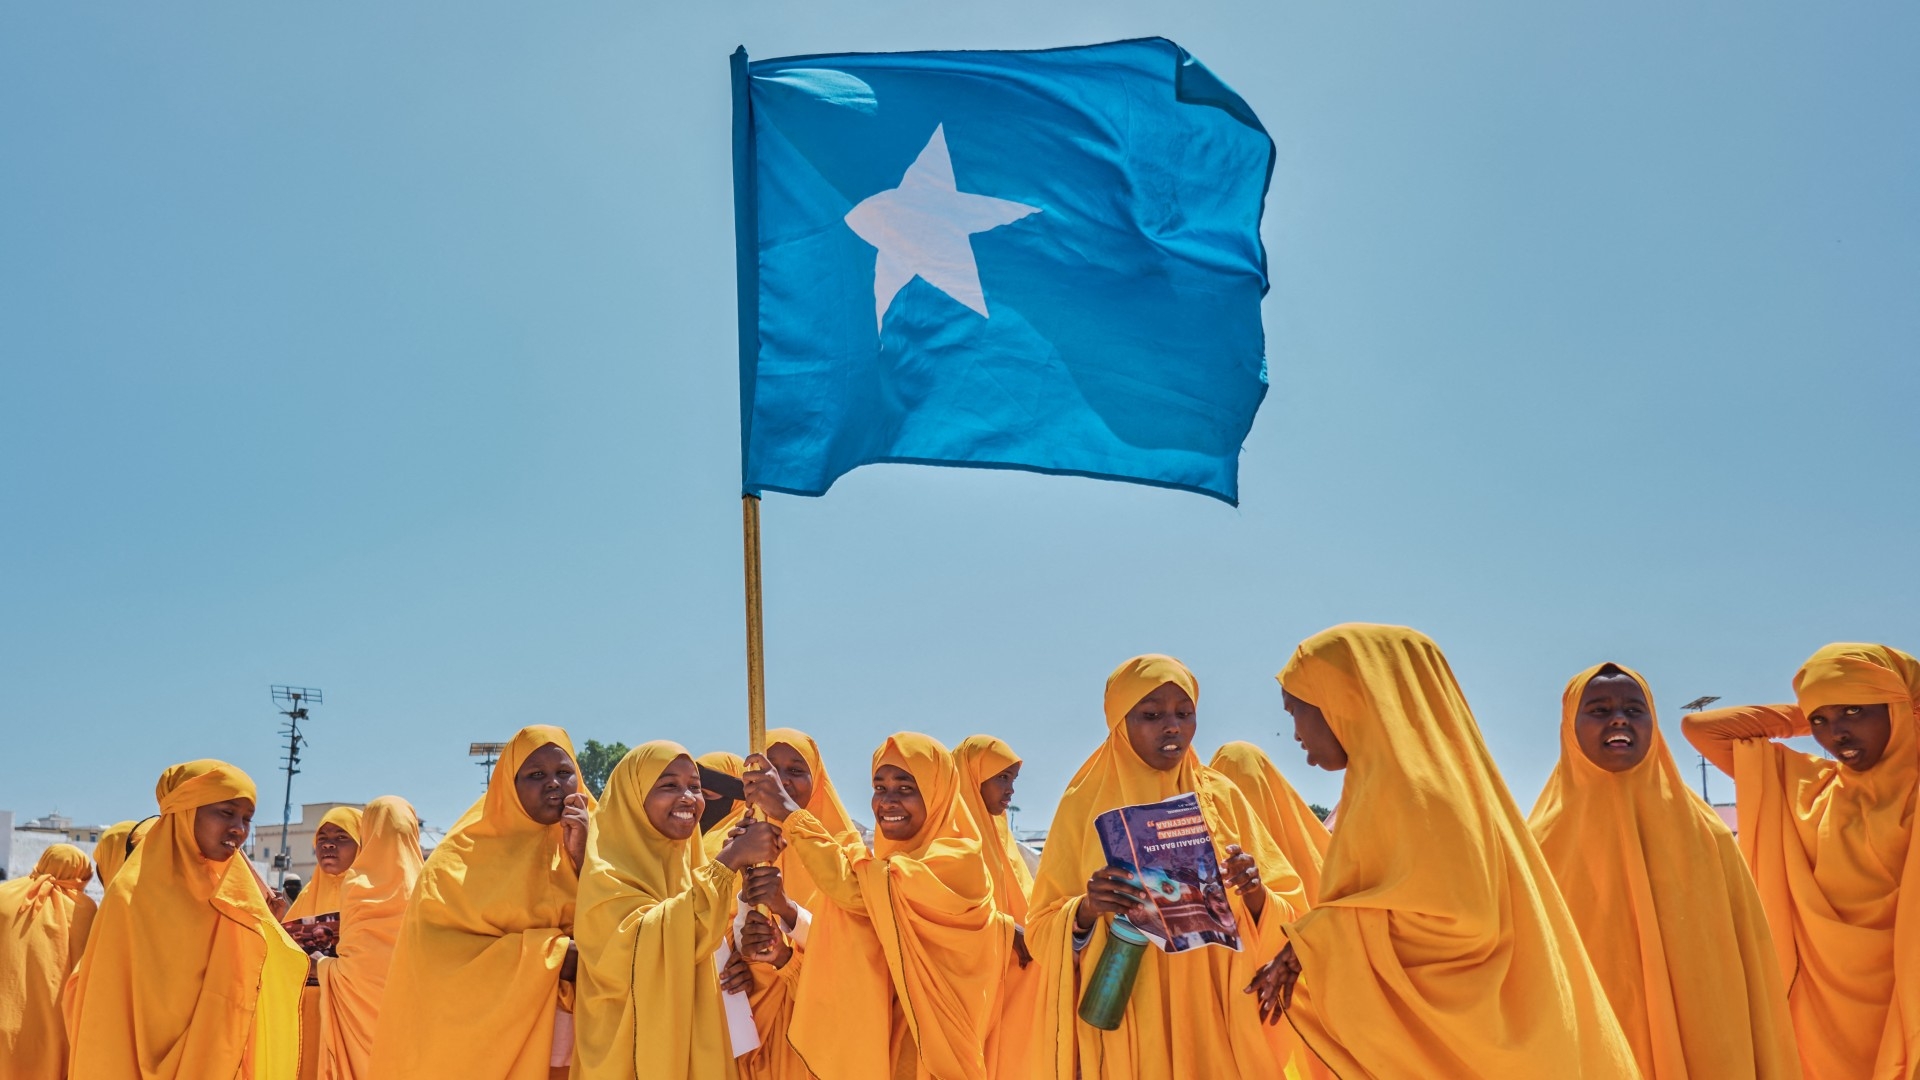 Students wave a Somali flag during a protest following the port deal signed between Ethiopia and Somaliland, in Mogadishu (AFP/Abdishukri Haybe)